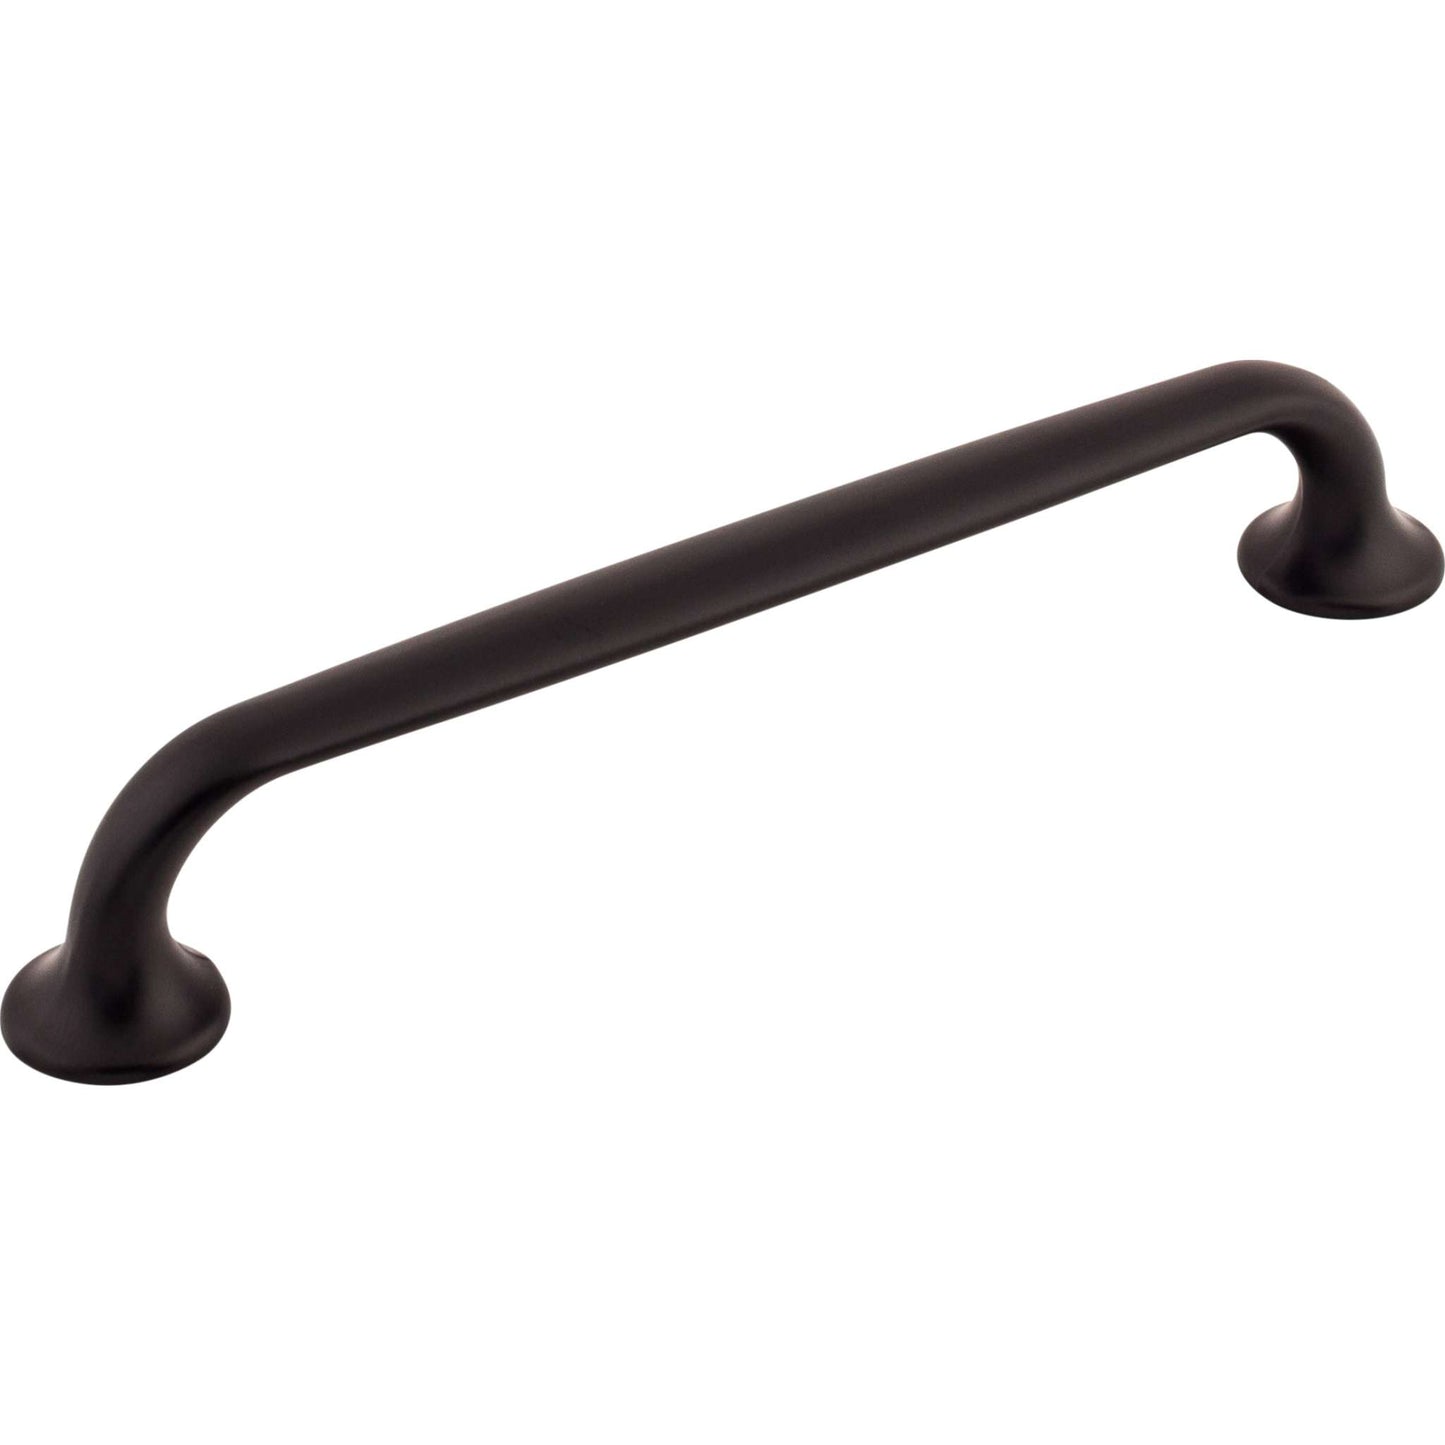 Top Knobs - Oculus Oval Pull